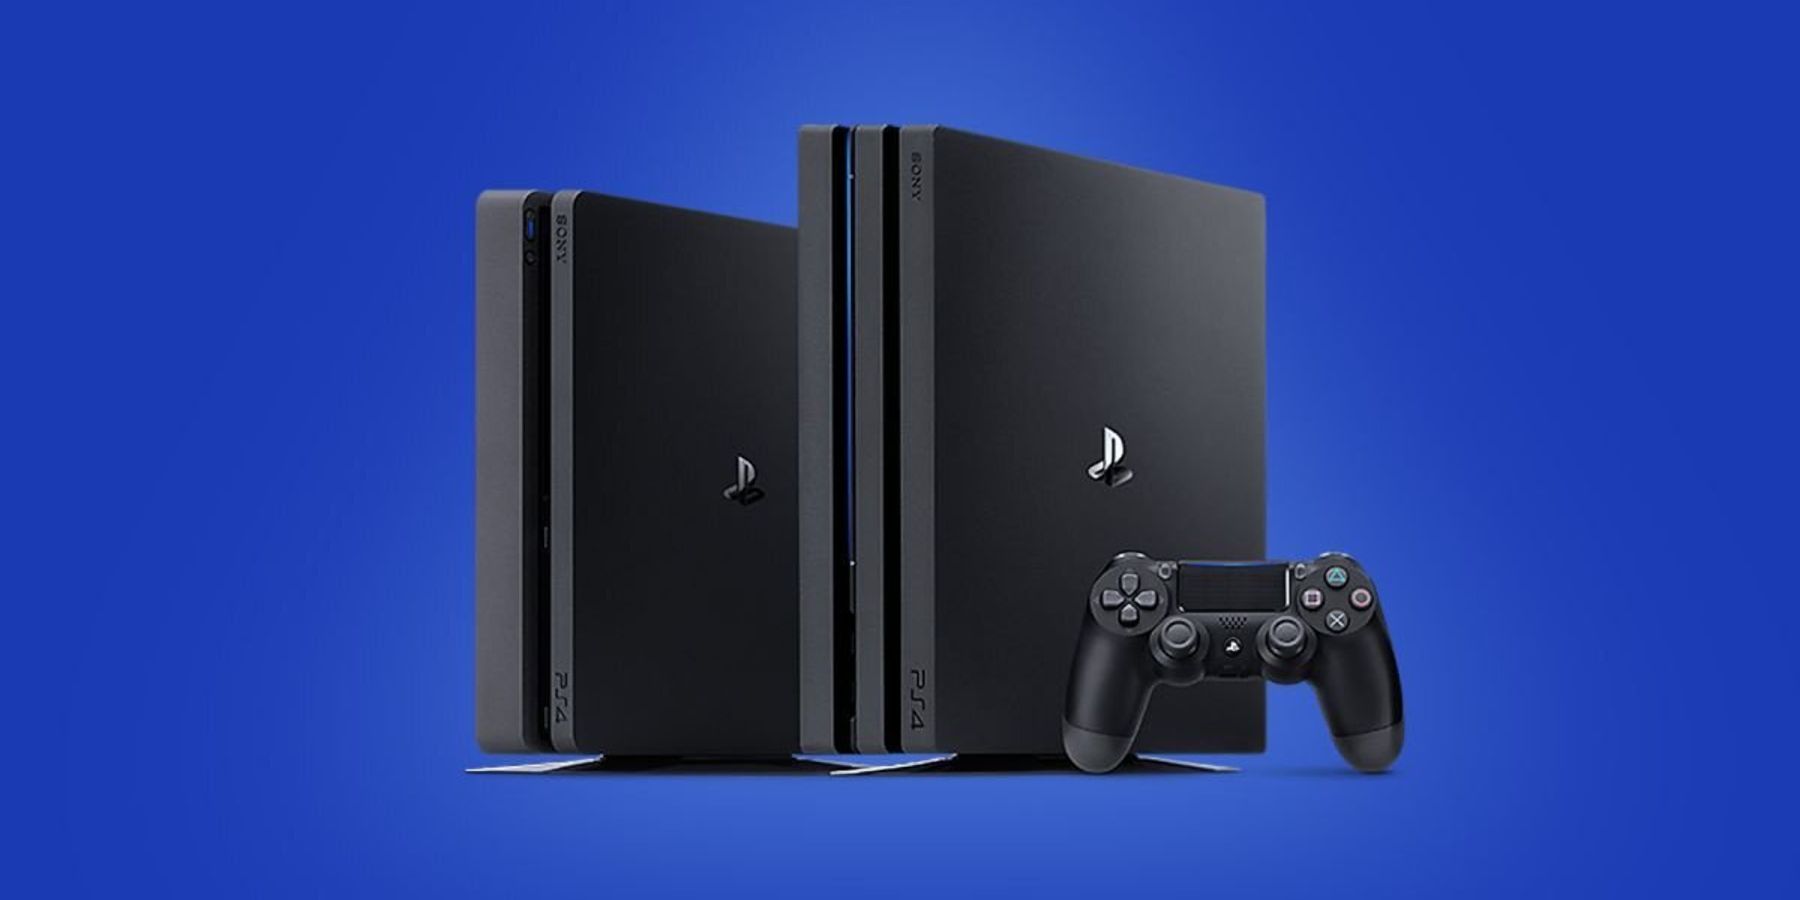 ps4 and ps4 pro